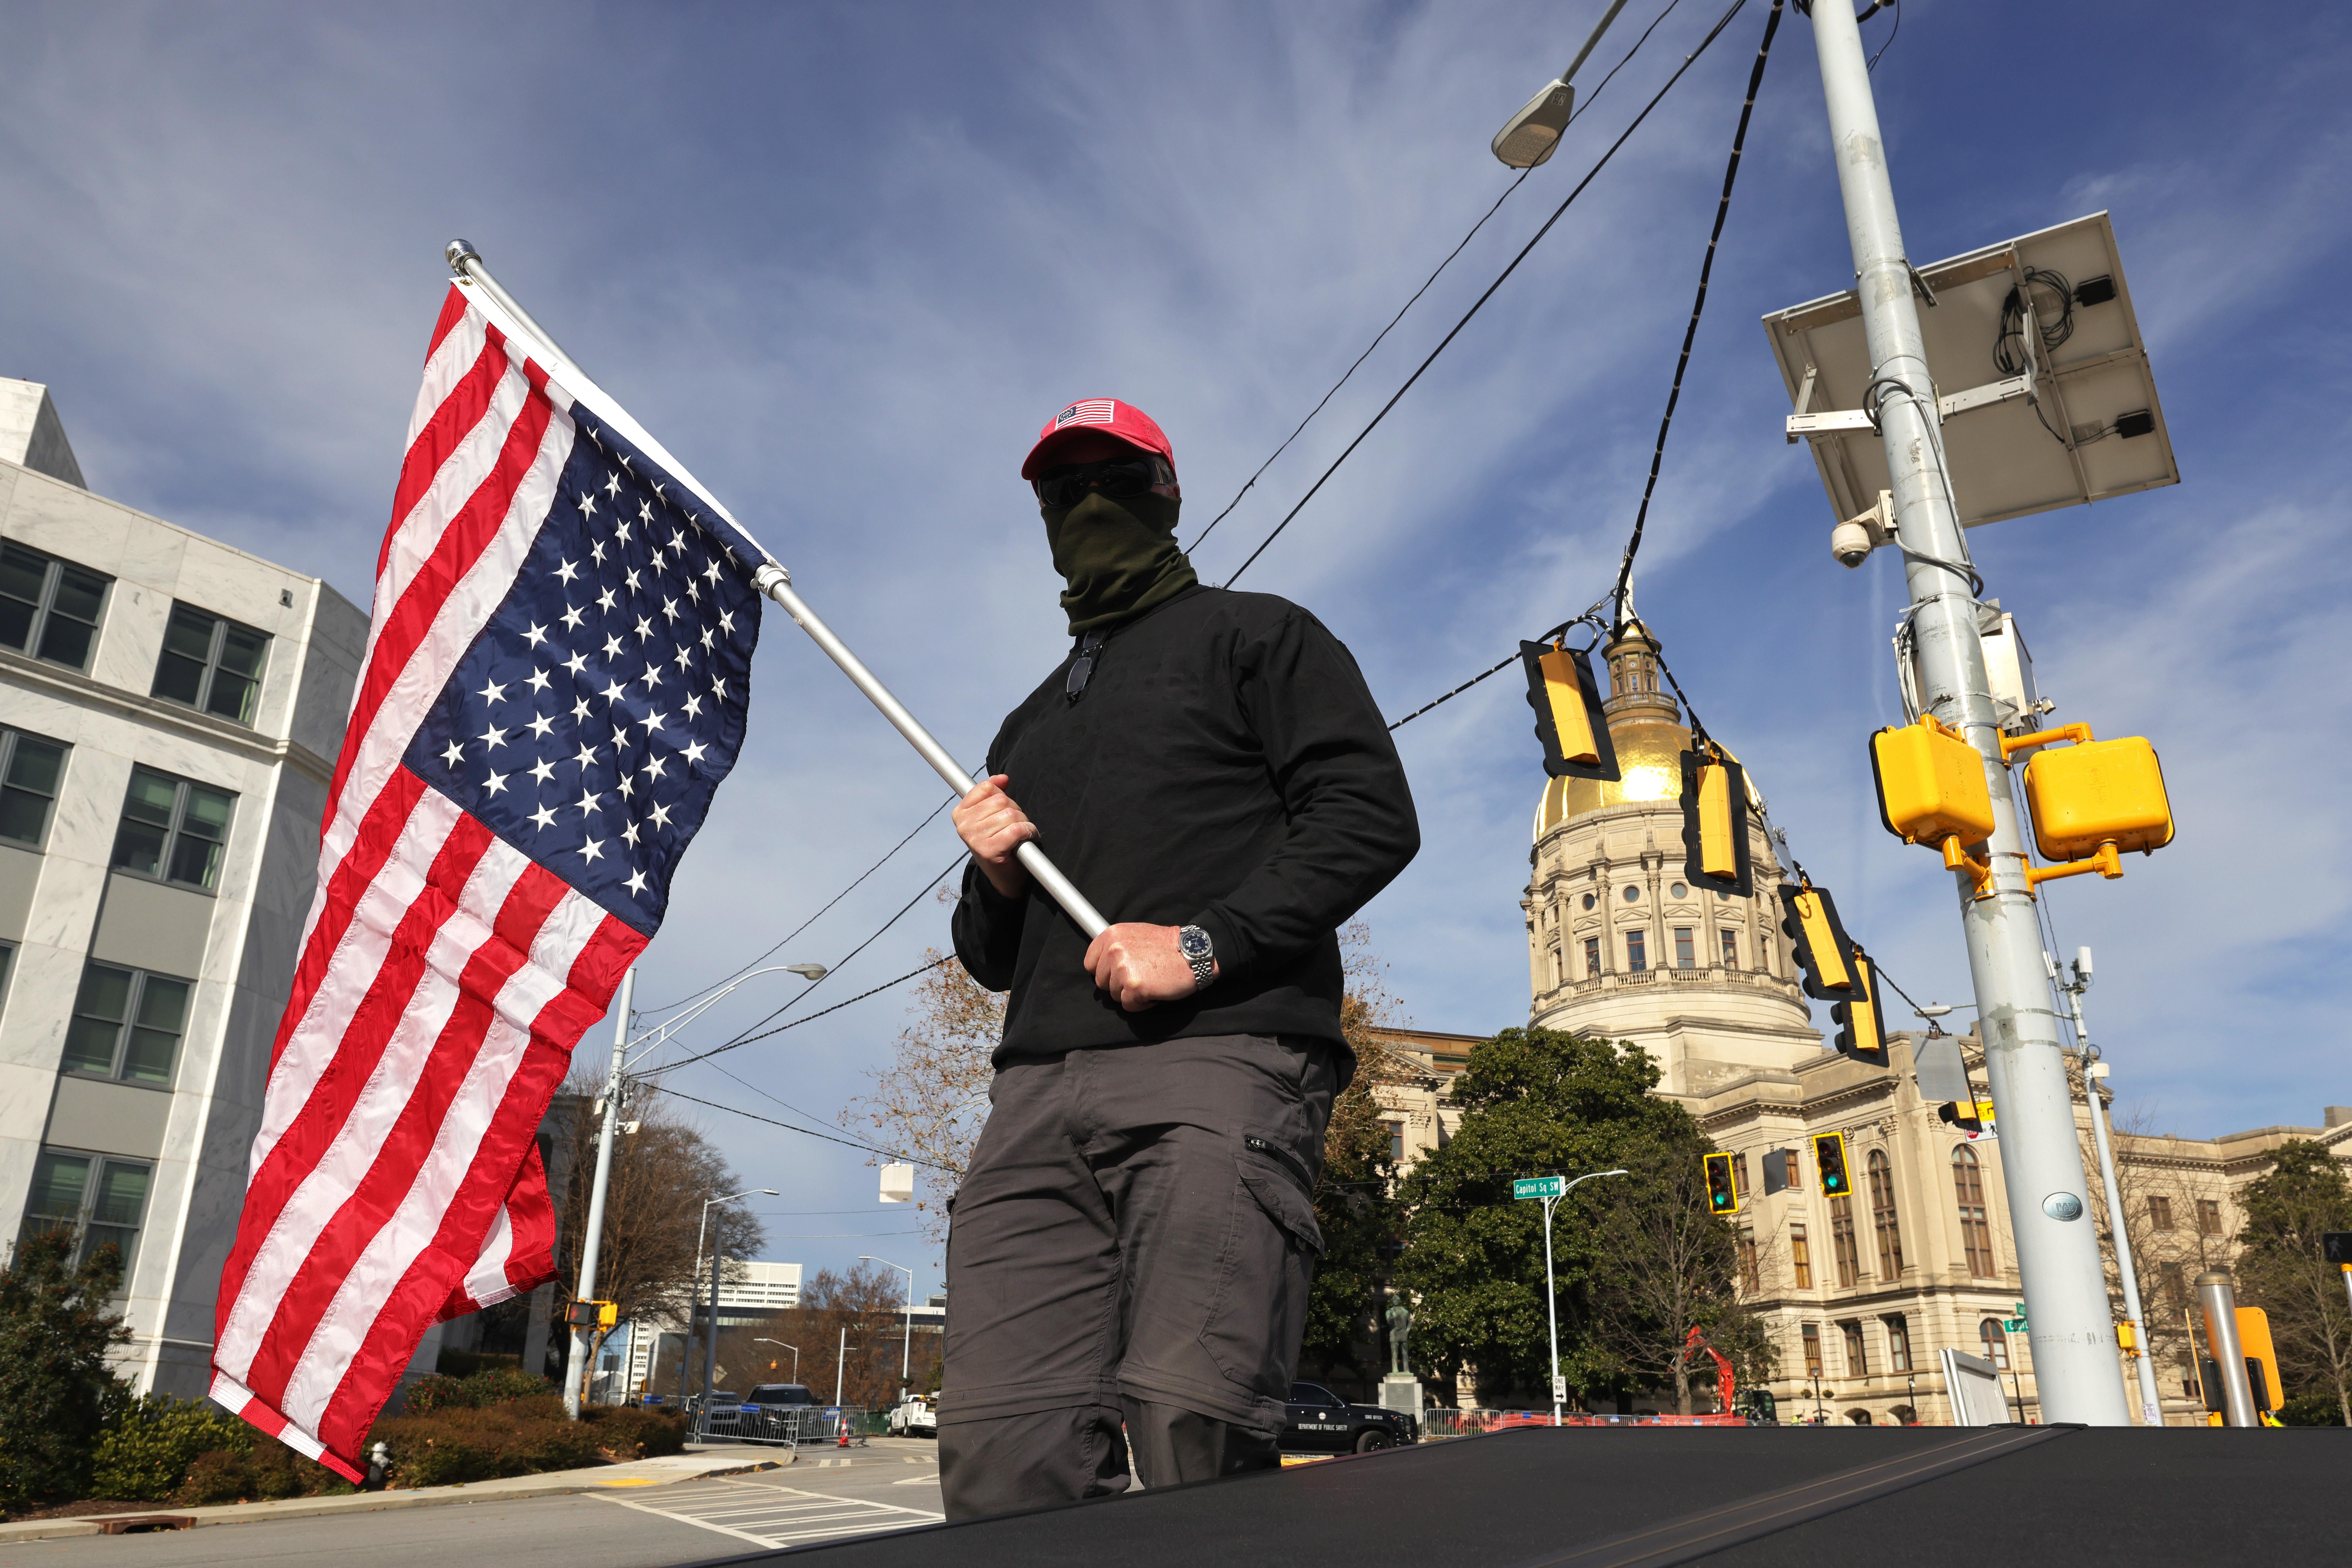 Man wearing black clothing, a black gaiter, and a red MAGA hat holds an upside-down American flag as he stands at an intersection. The Capitol can be seen in the distance behind him.